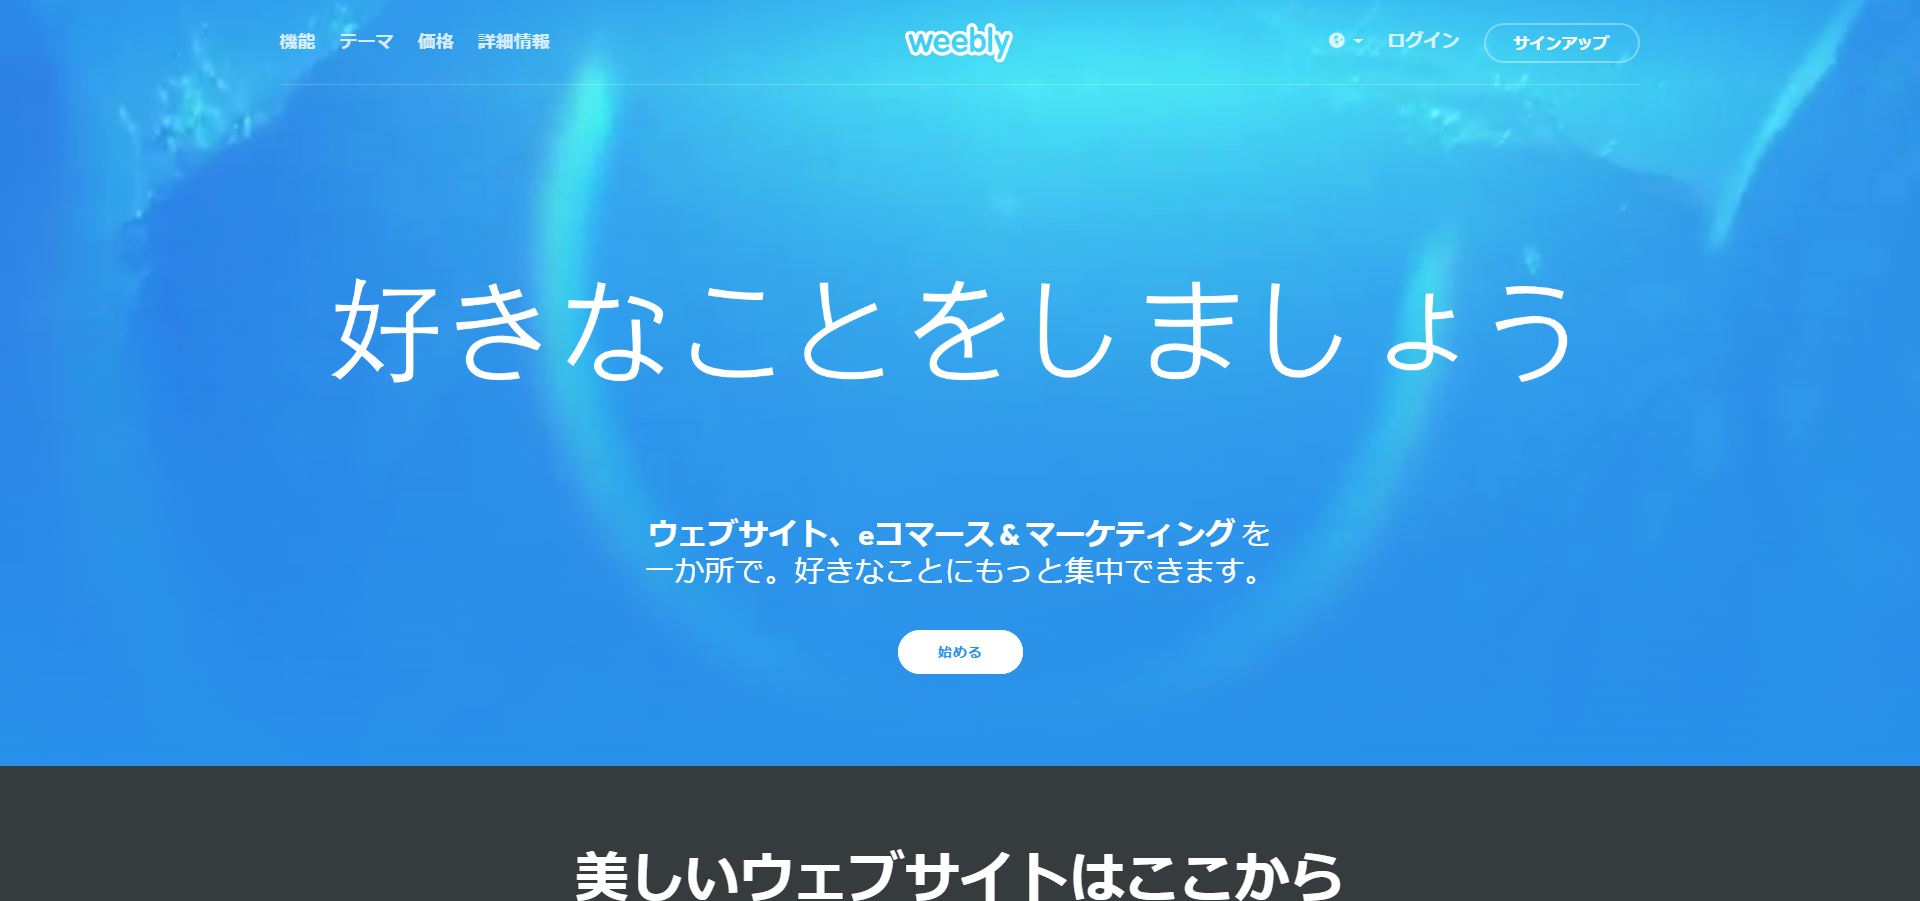 「weebly」の公式サイト